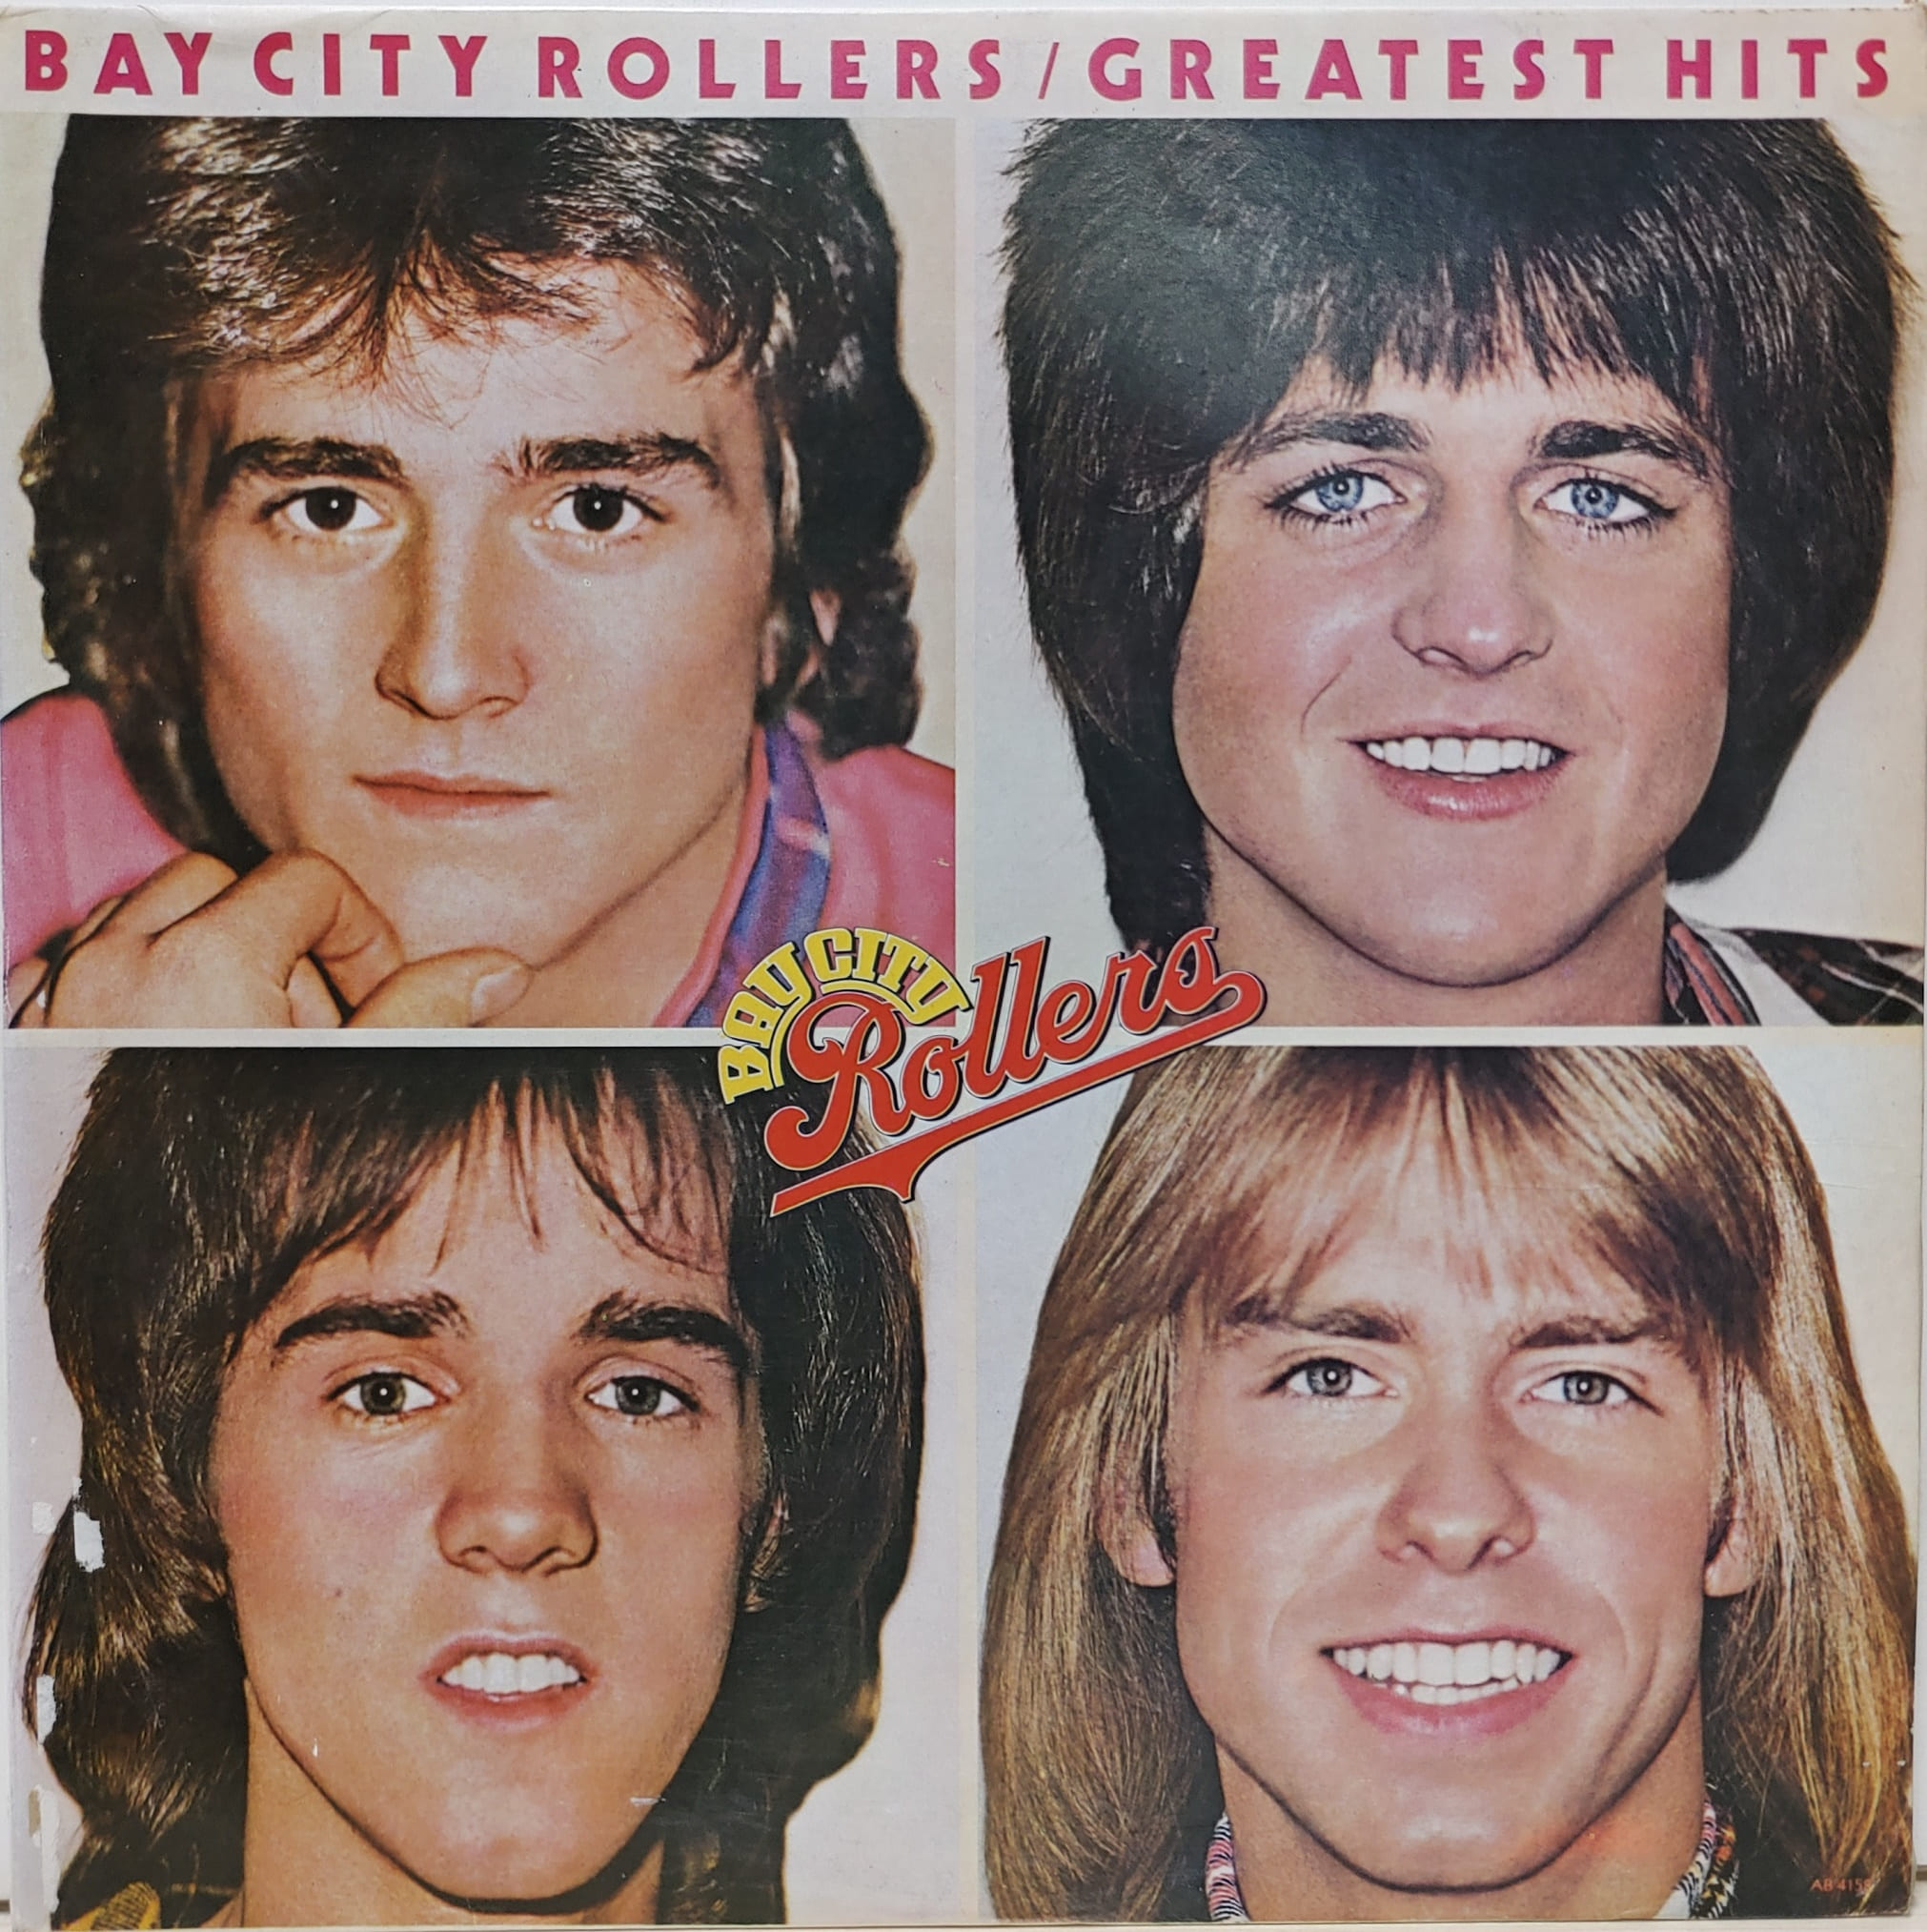 BAY CITY ROLLERS / GREATEST HITS